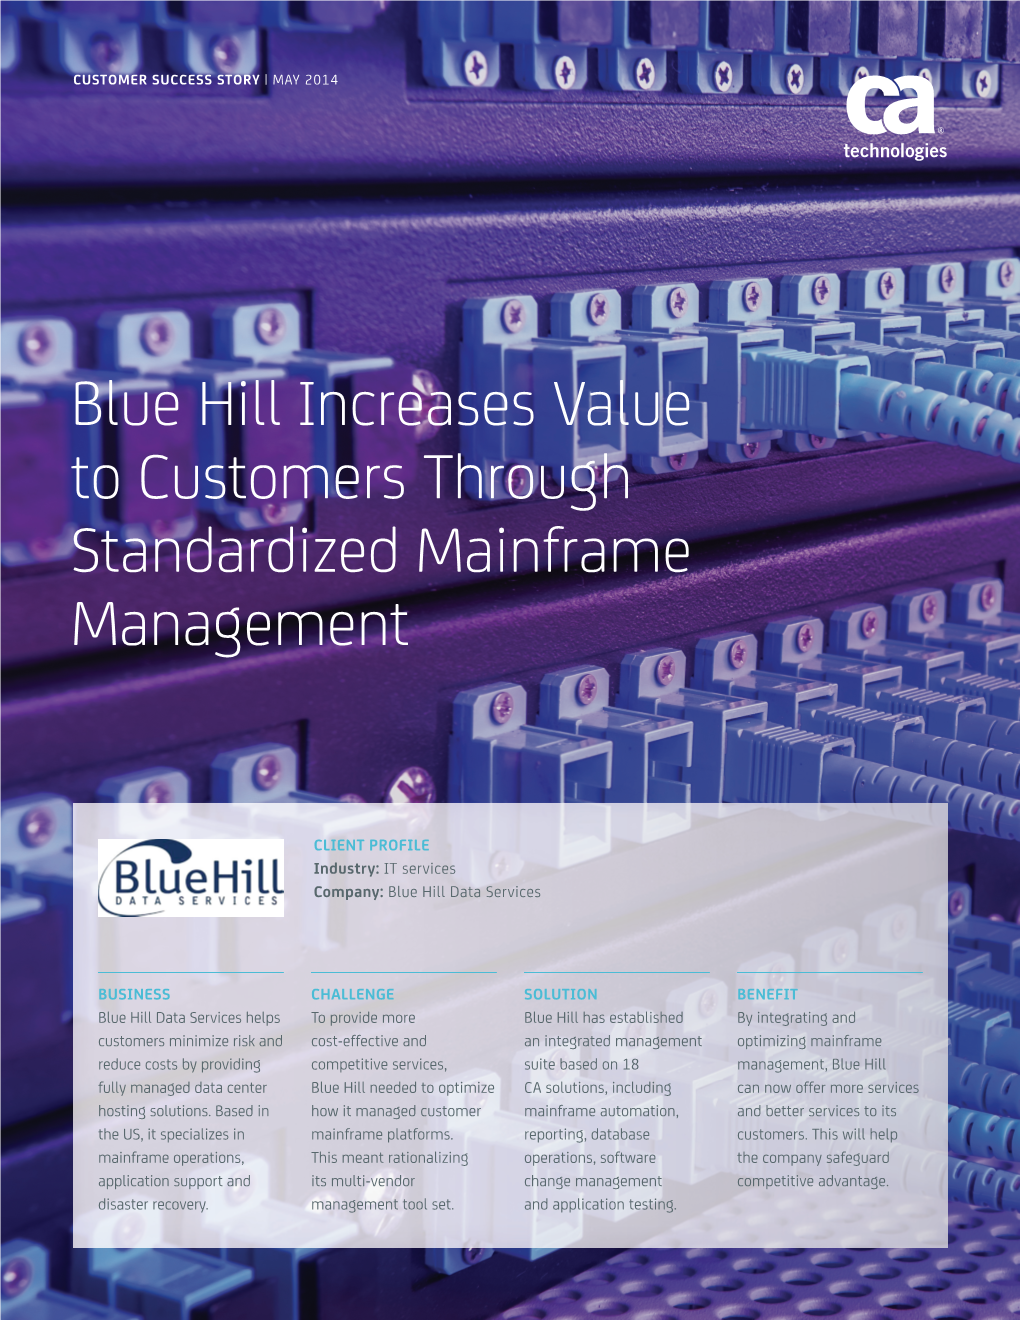 Blue Hill Increases Value to Customers Through Standardized Mainframe Management